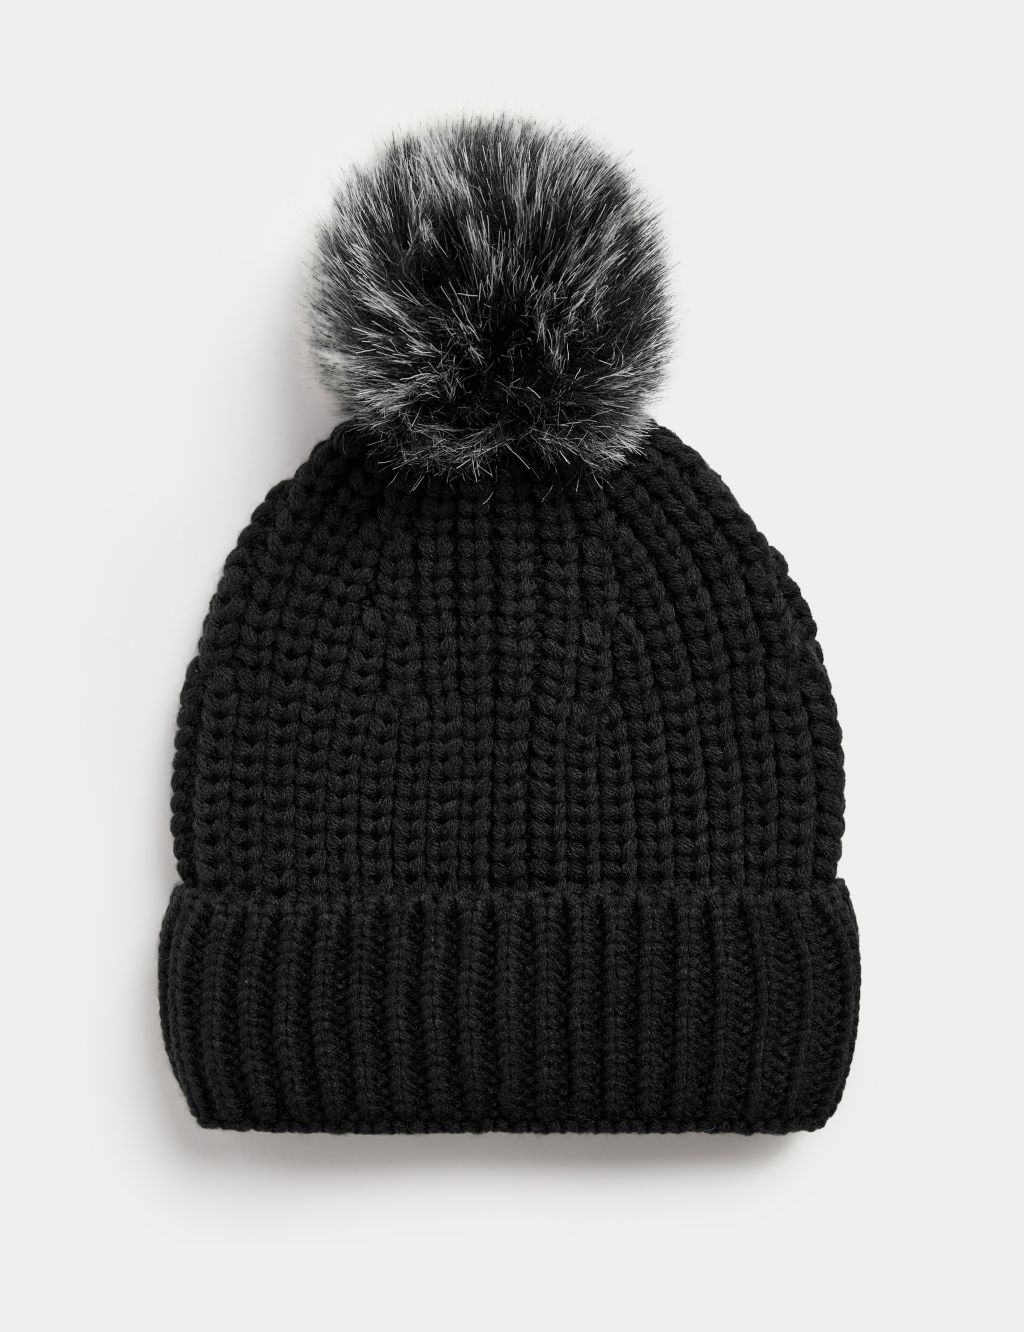 Knitted Pom Hat image 1